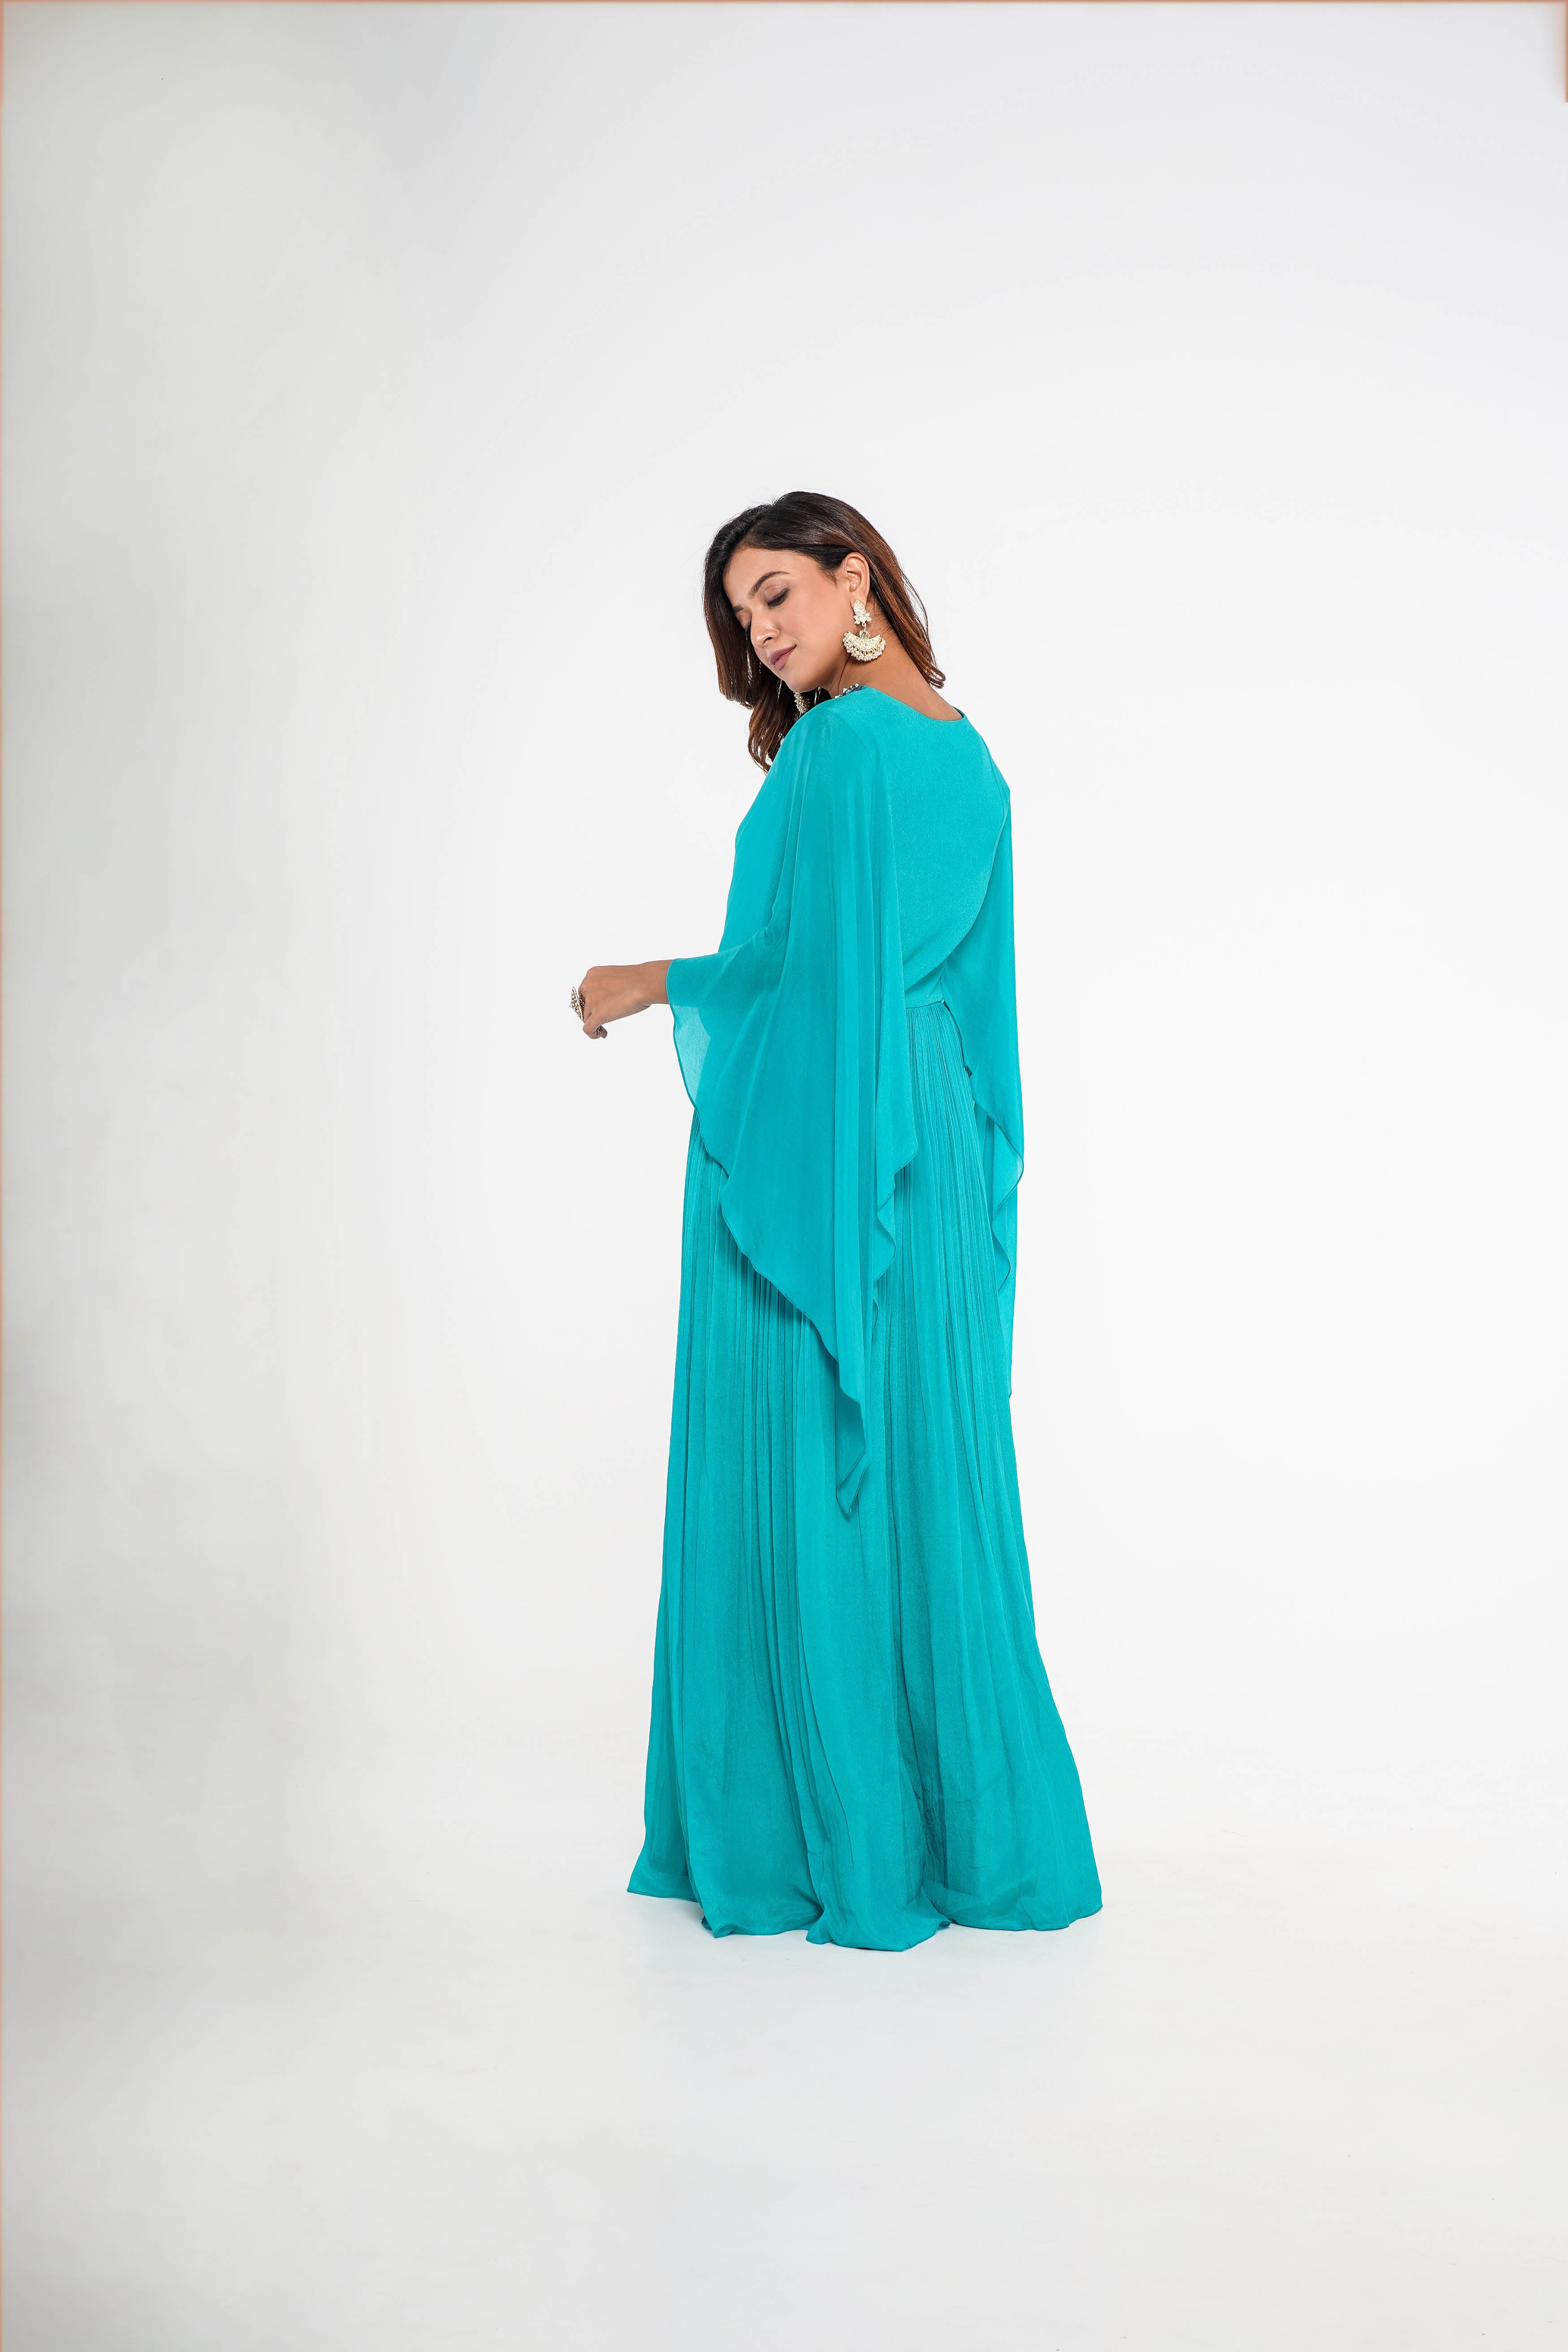 Sea green cape style draped gown.